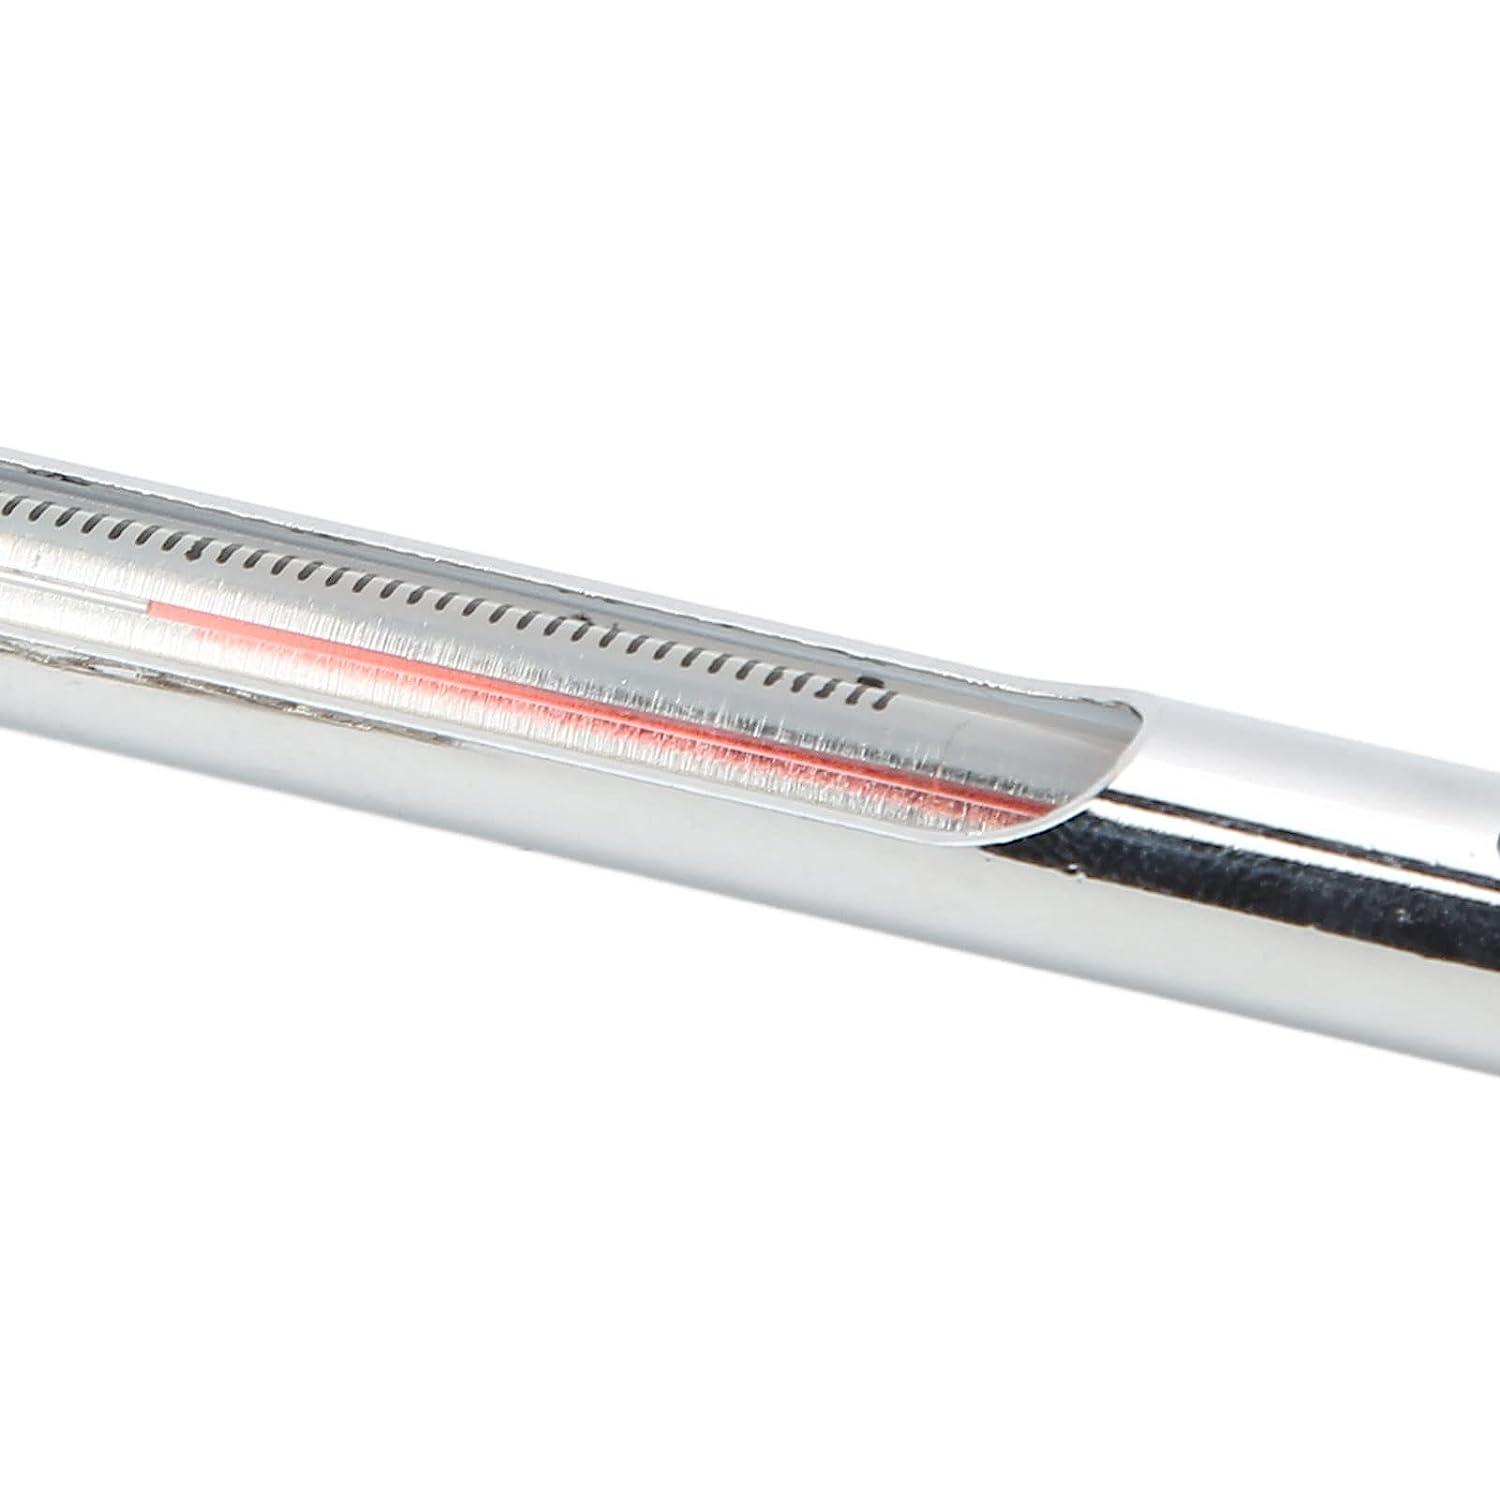 Fishing Thermometer, Practical Sturdy Sustainable Stream Water